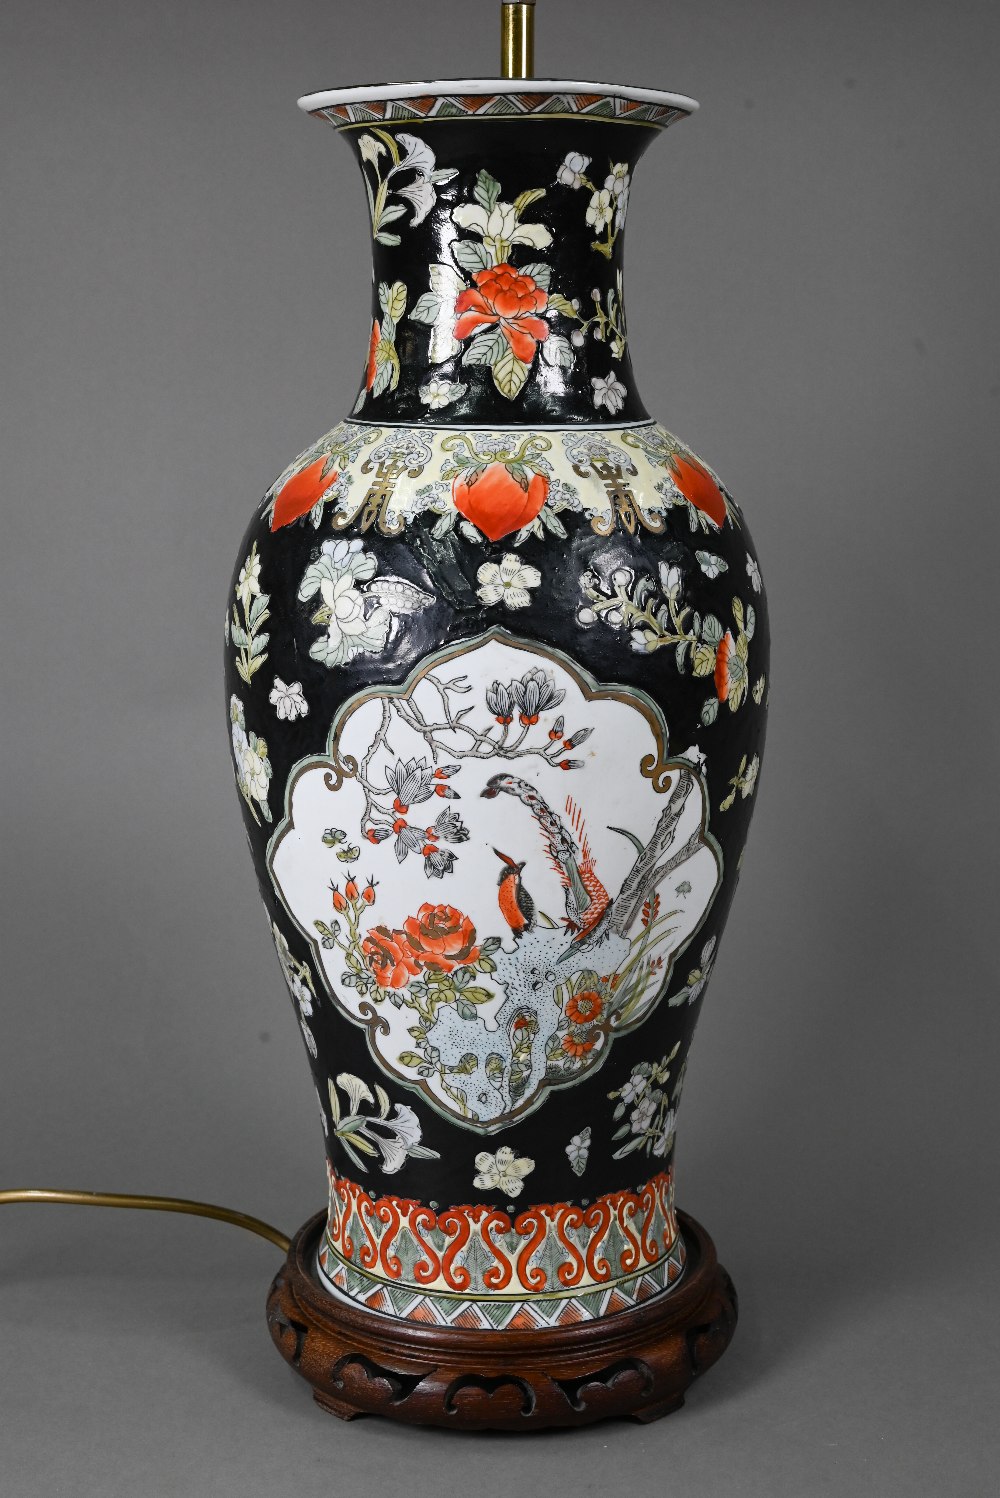 A late 19th or early 20th century Chinese famille noire style baluster vase (drilled and mounted